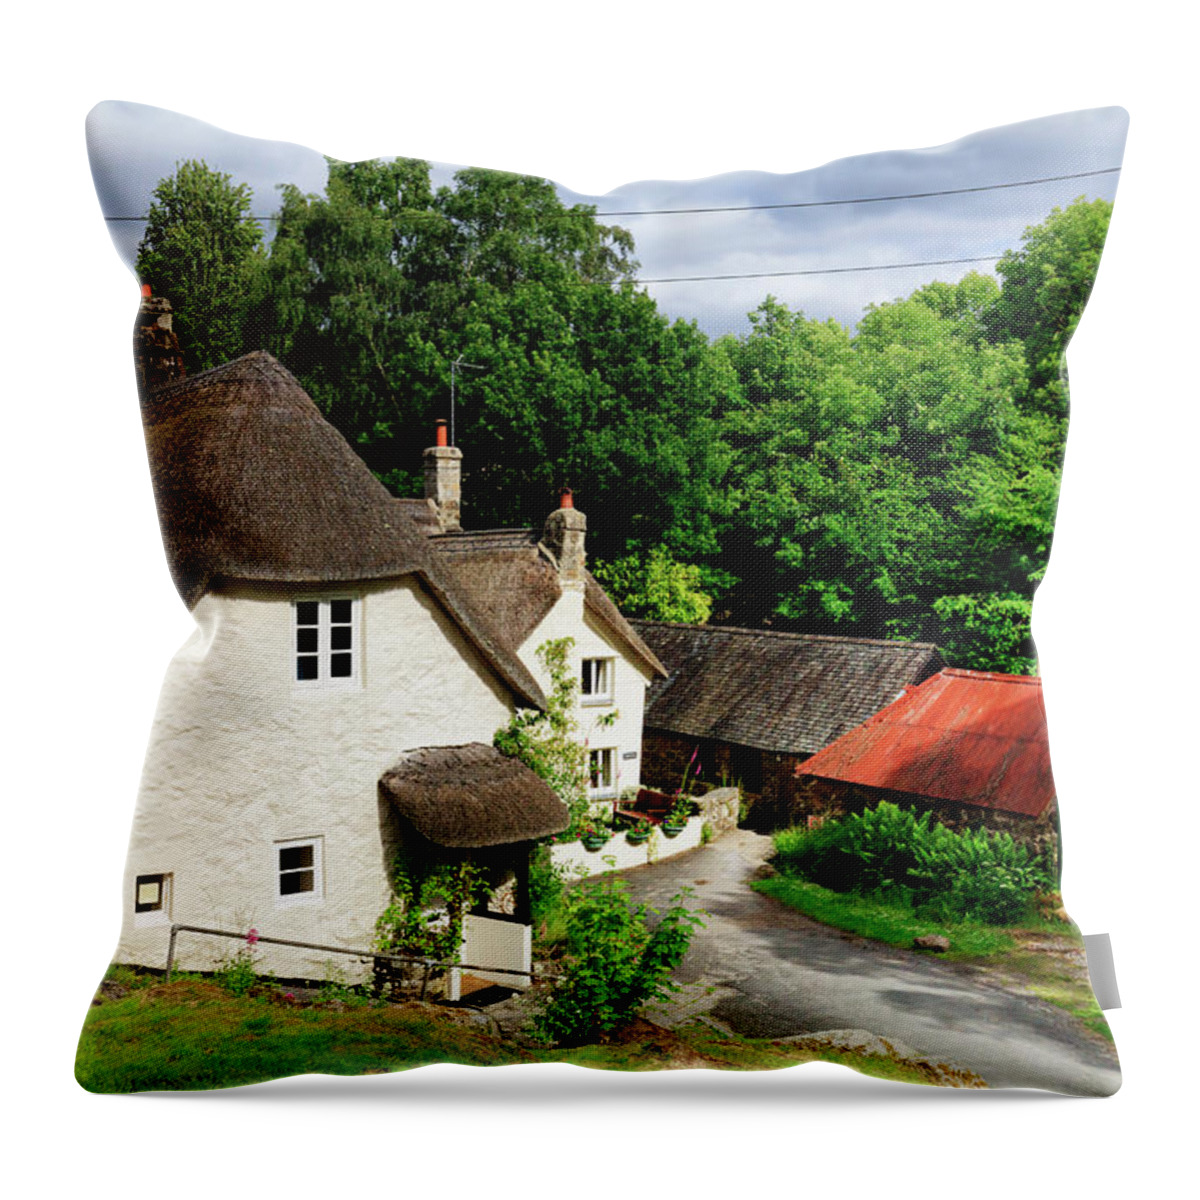 Estock Throw Pillow featuring the digital art United Kingdom, England, Somerset, Great Britain, British Isles, Typical Houses In The Countryside by Maurizio Rellini